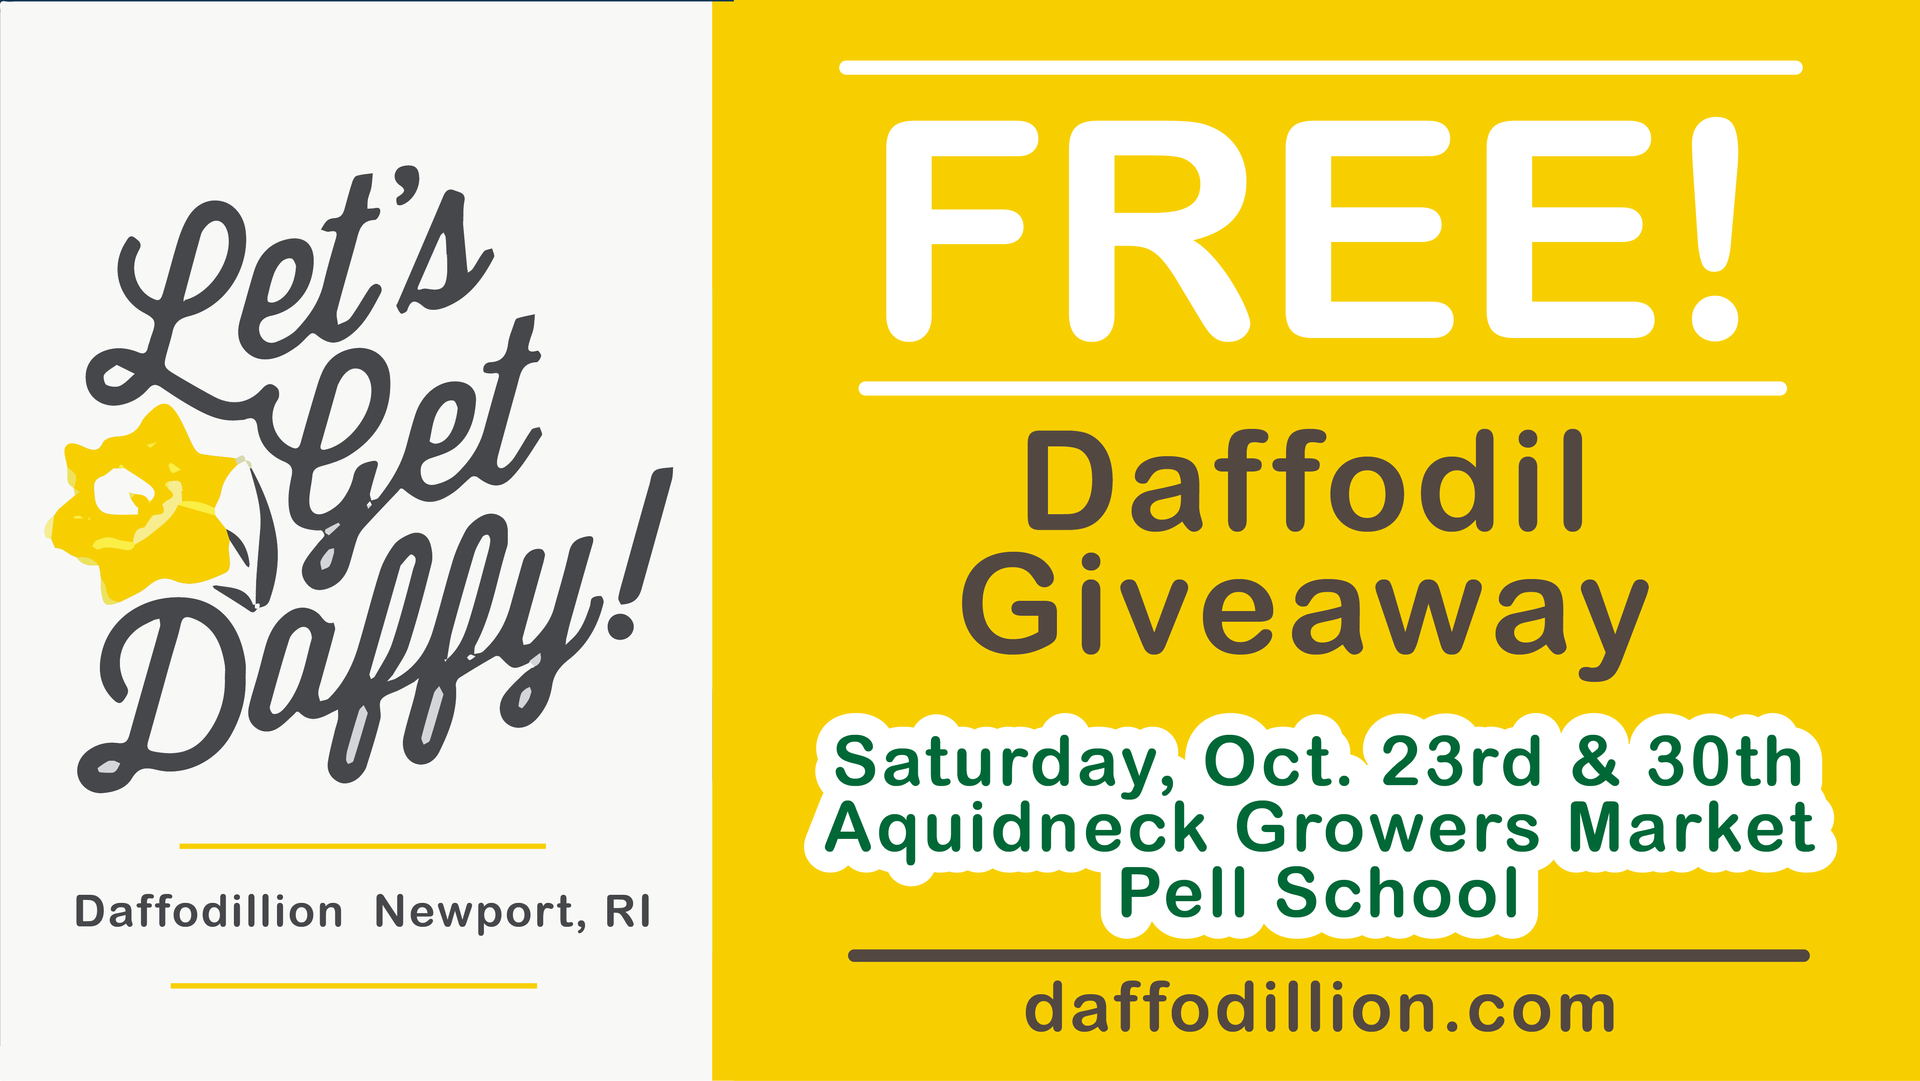 Image for Newport in Bloom and Daffodillion will be distributing FREE “Dutch Master” daffodil bulbs